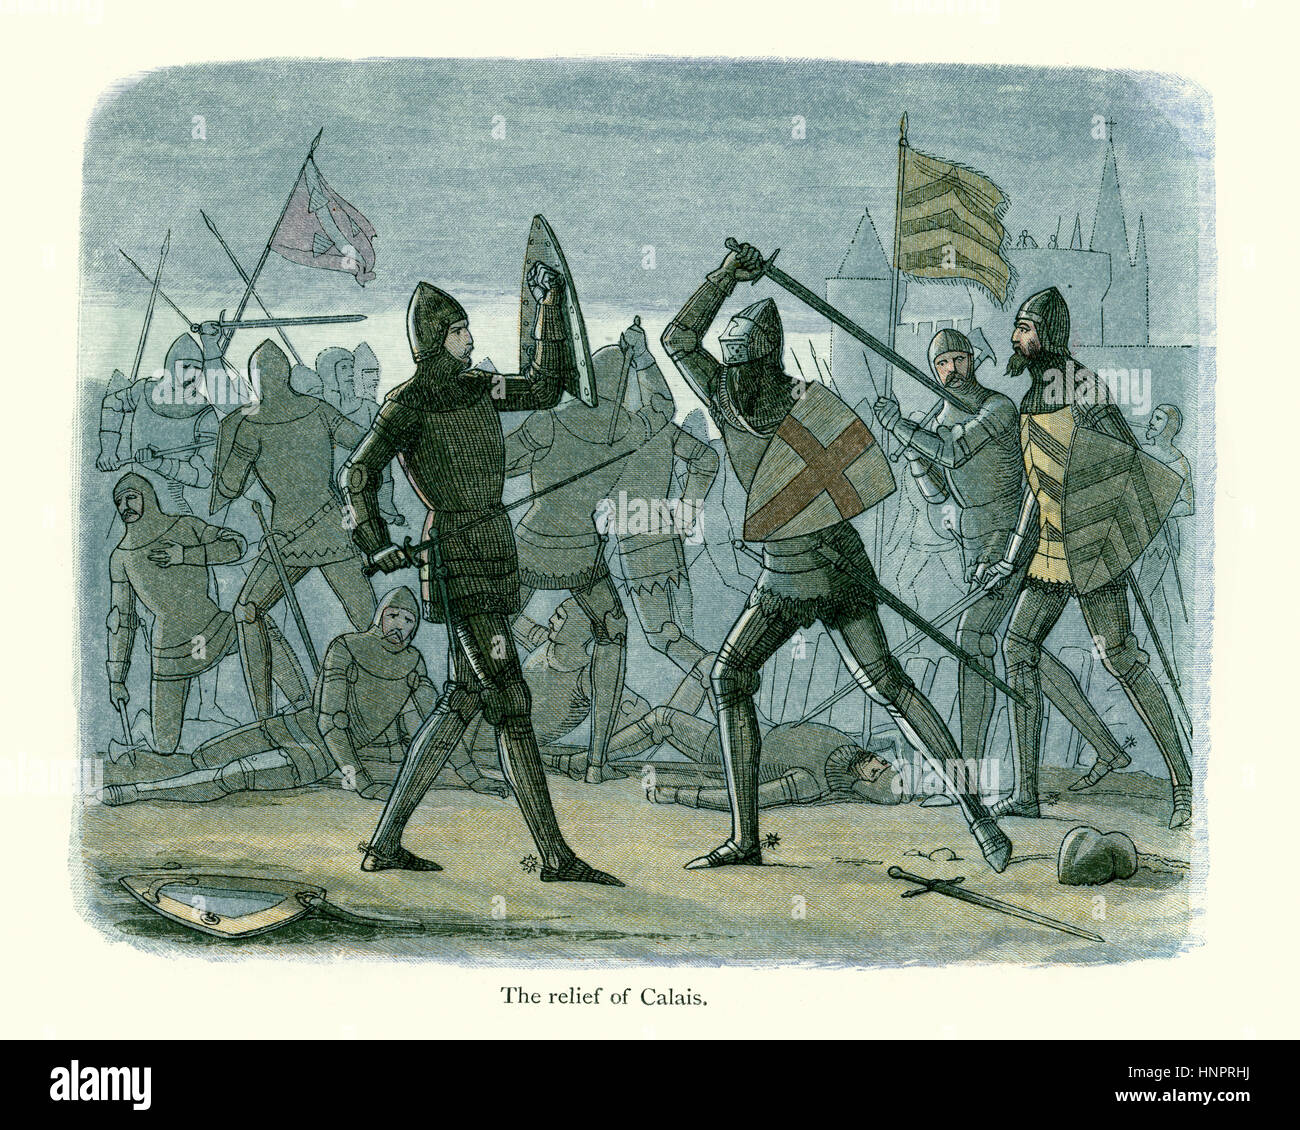 The relief of Calais.  English and French troops fight during the Hundred Years War.  Doyle, Chronicle of England Stock Photo